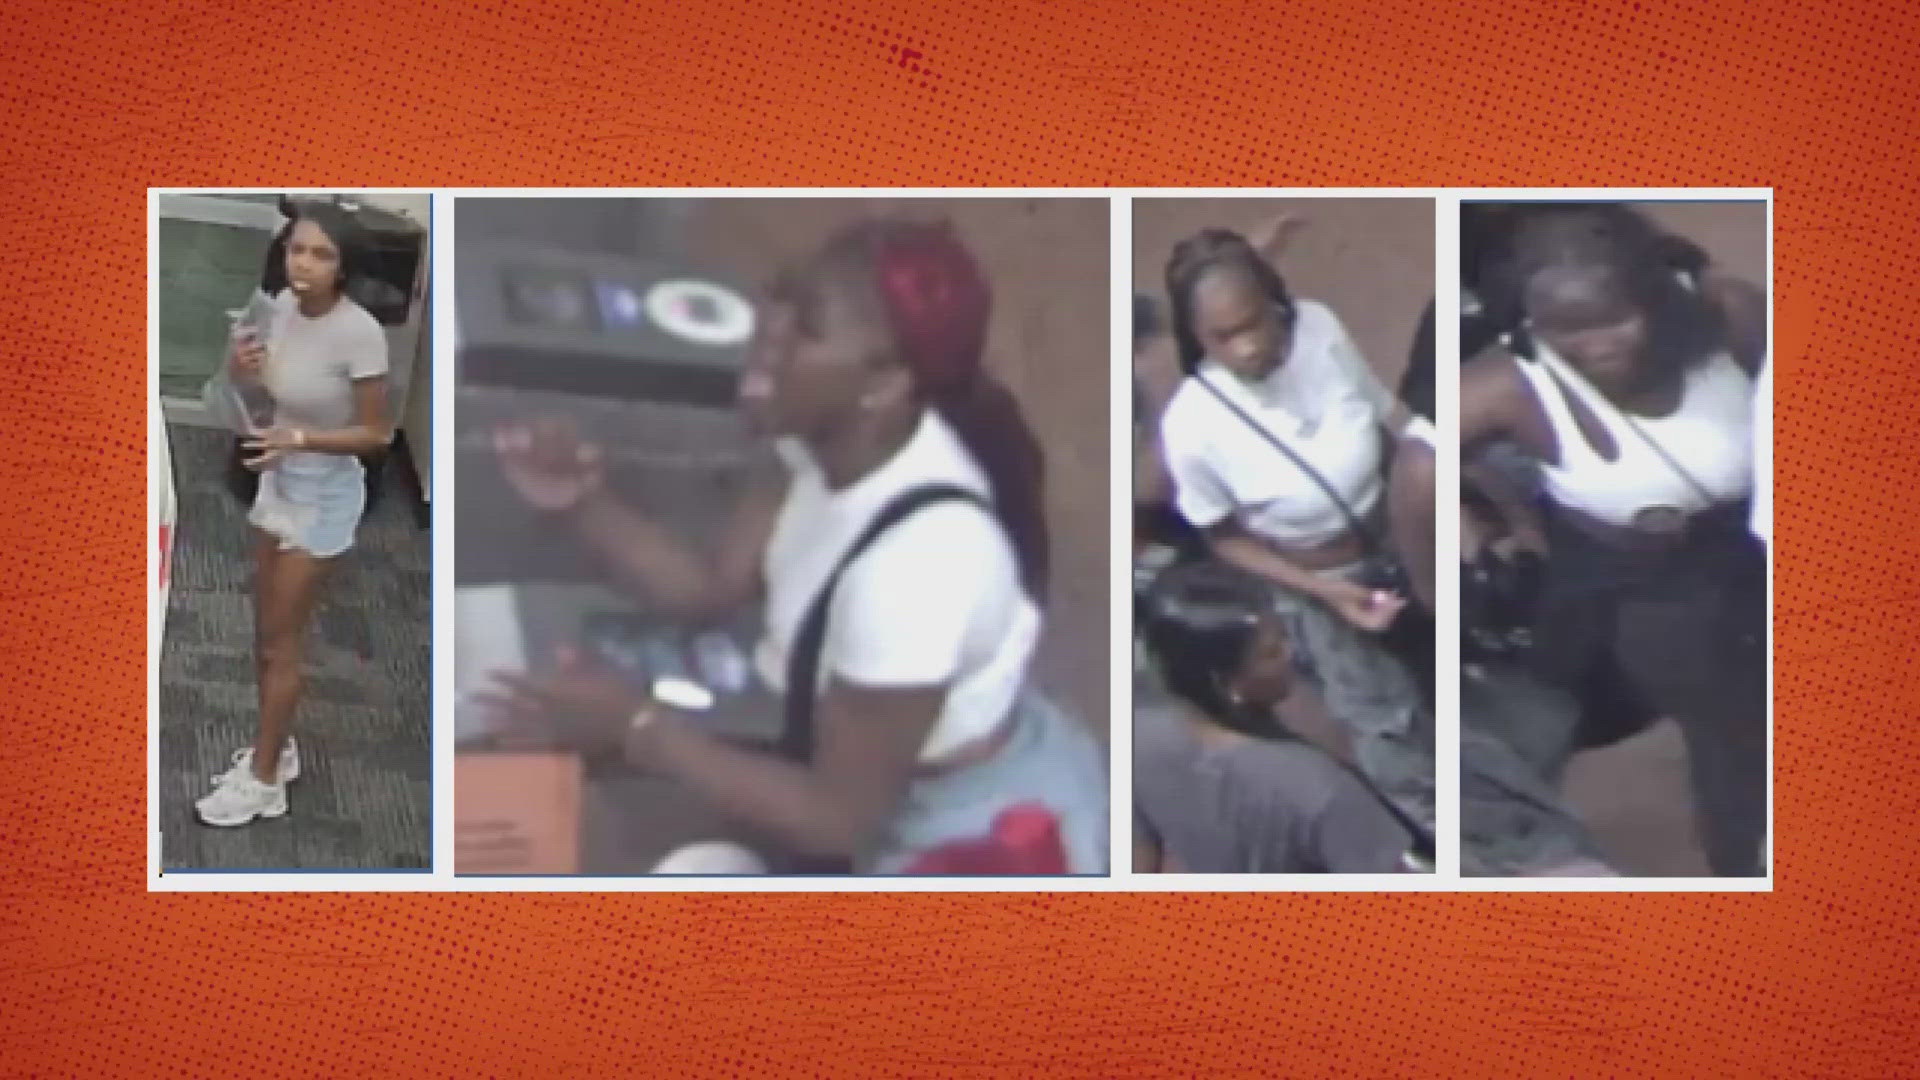 If you recognize anyone in these surveillance images, call police.